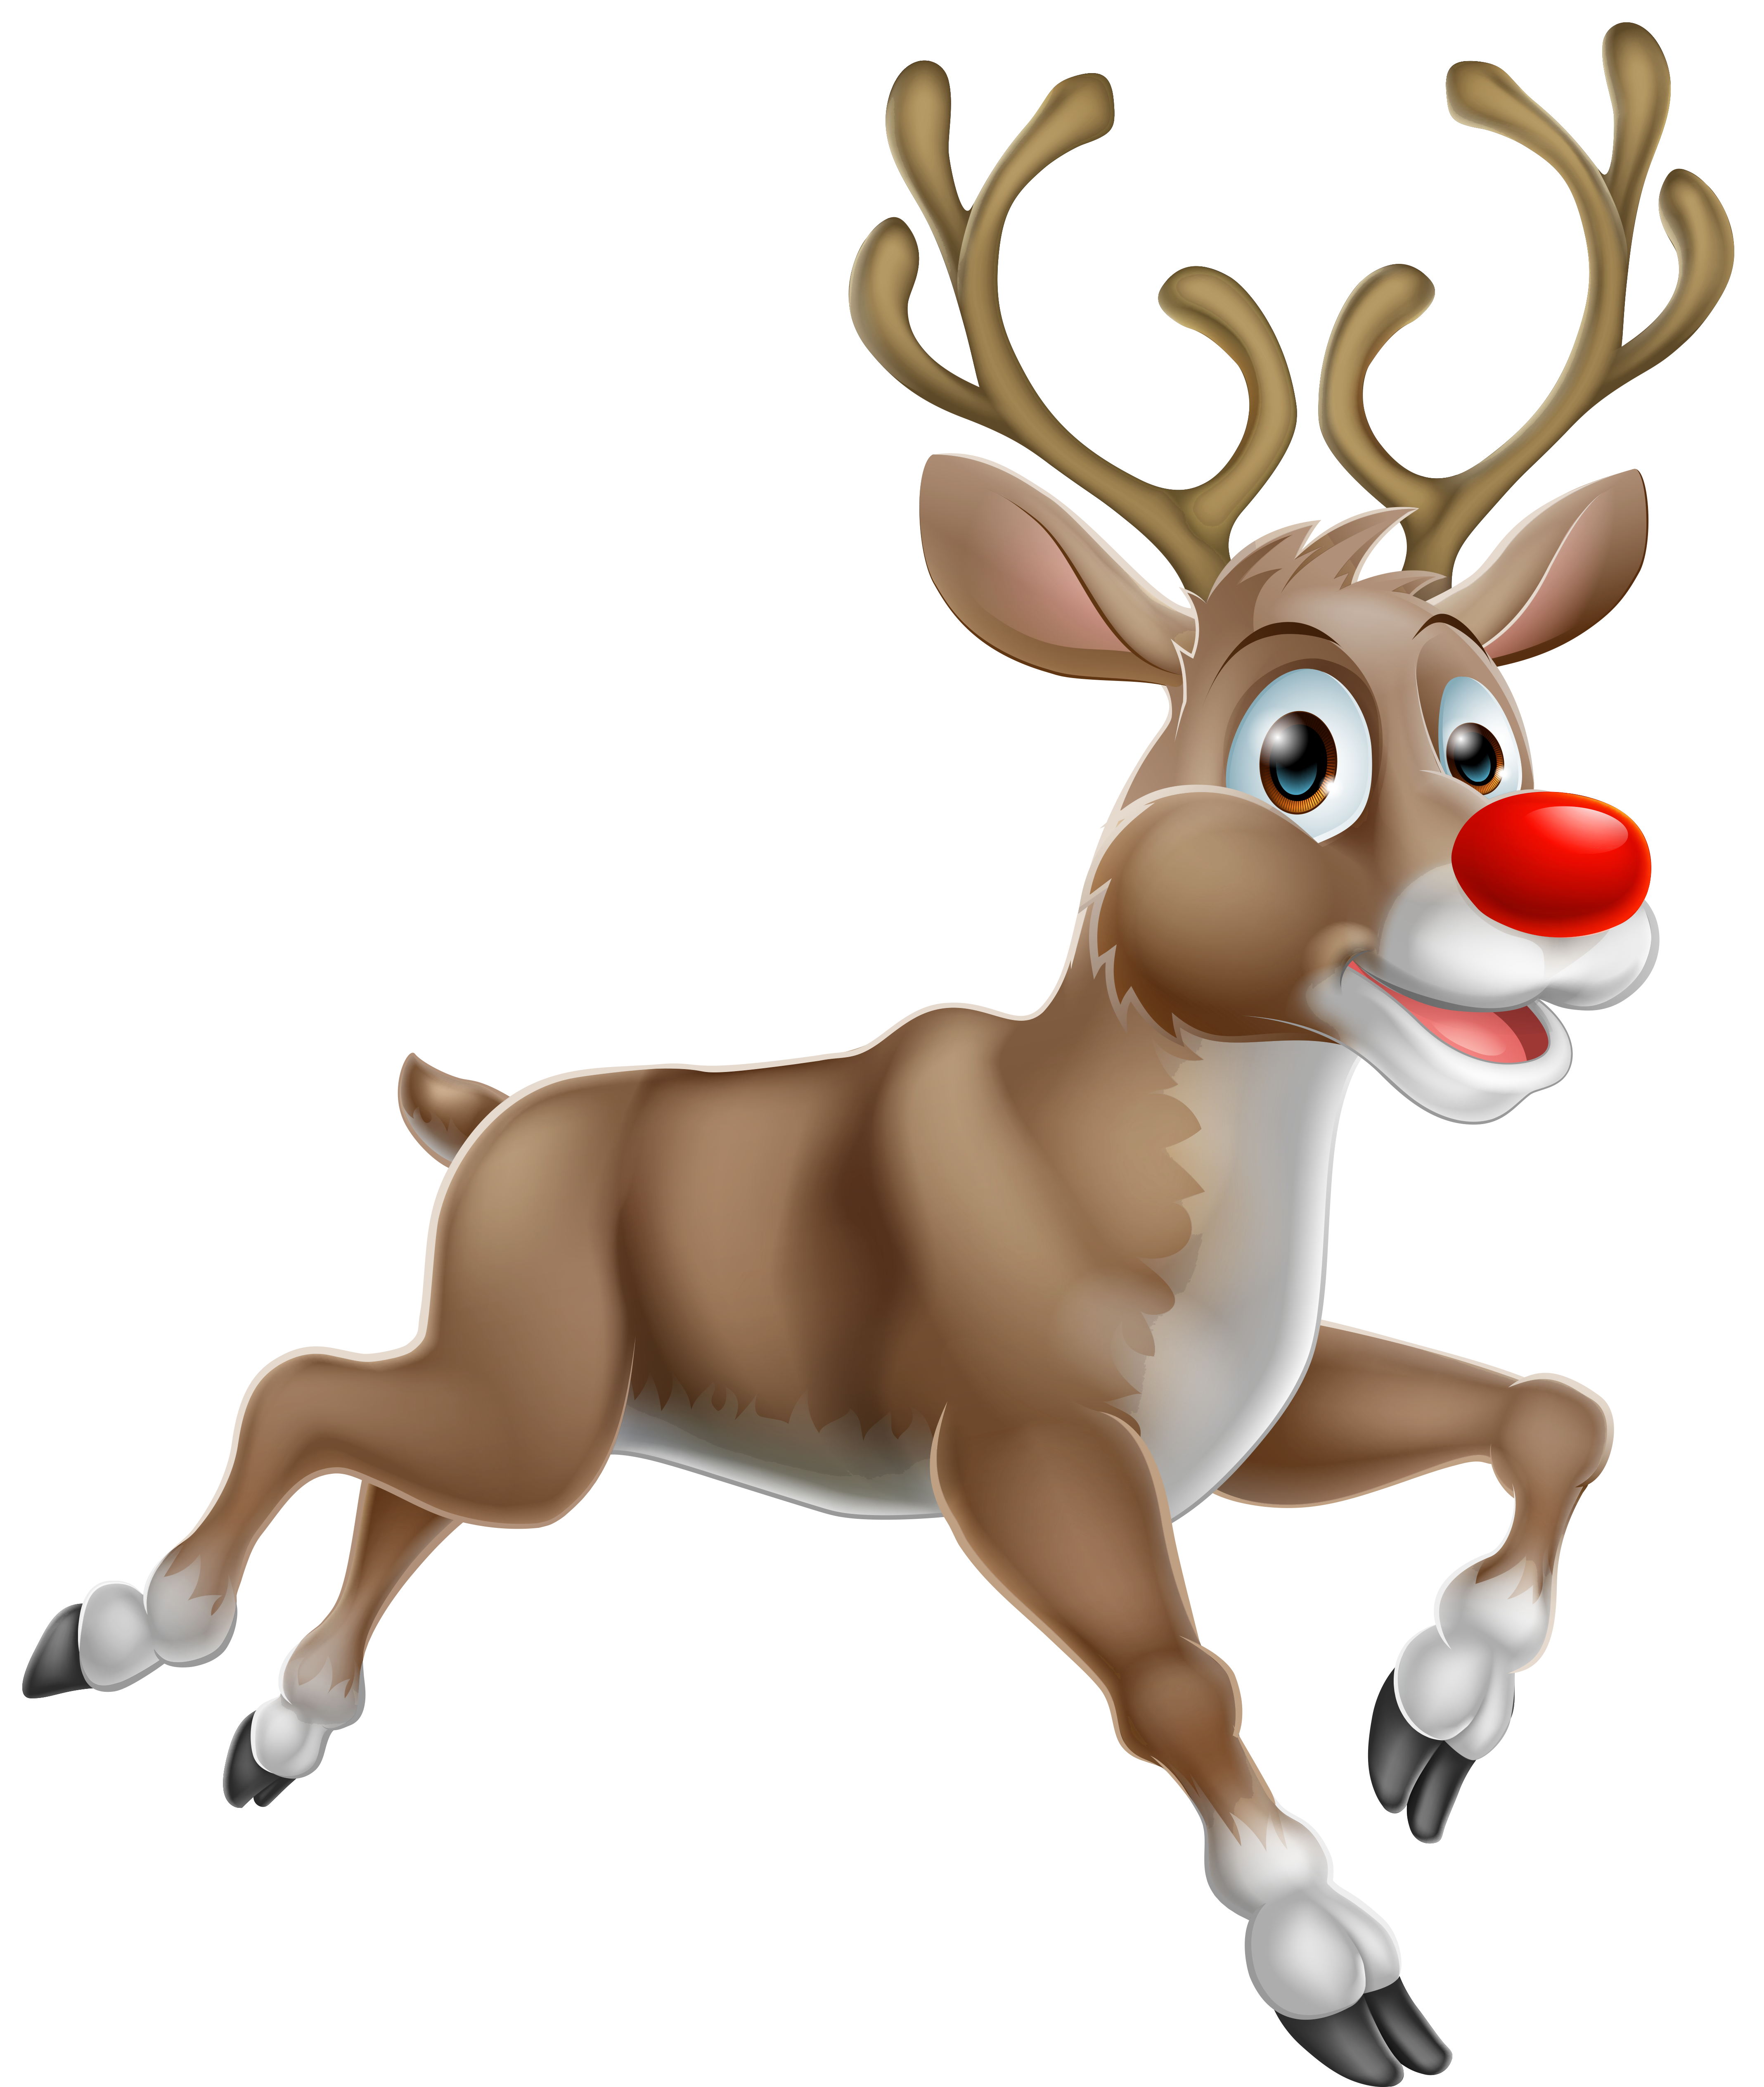 Reindeer Santa Claus Clip Art Christmas Day Rudolph Png 900x1089px